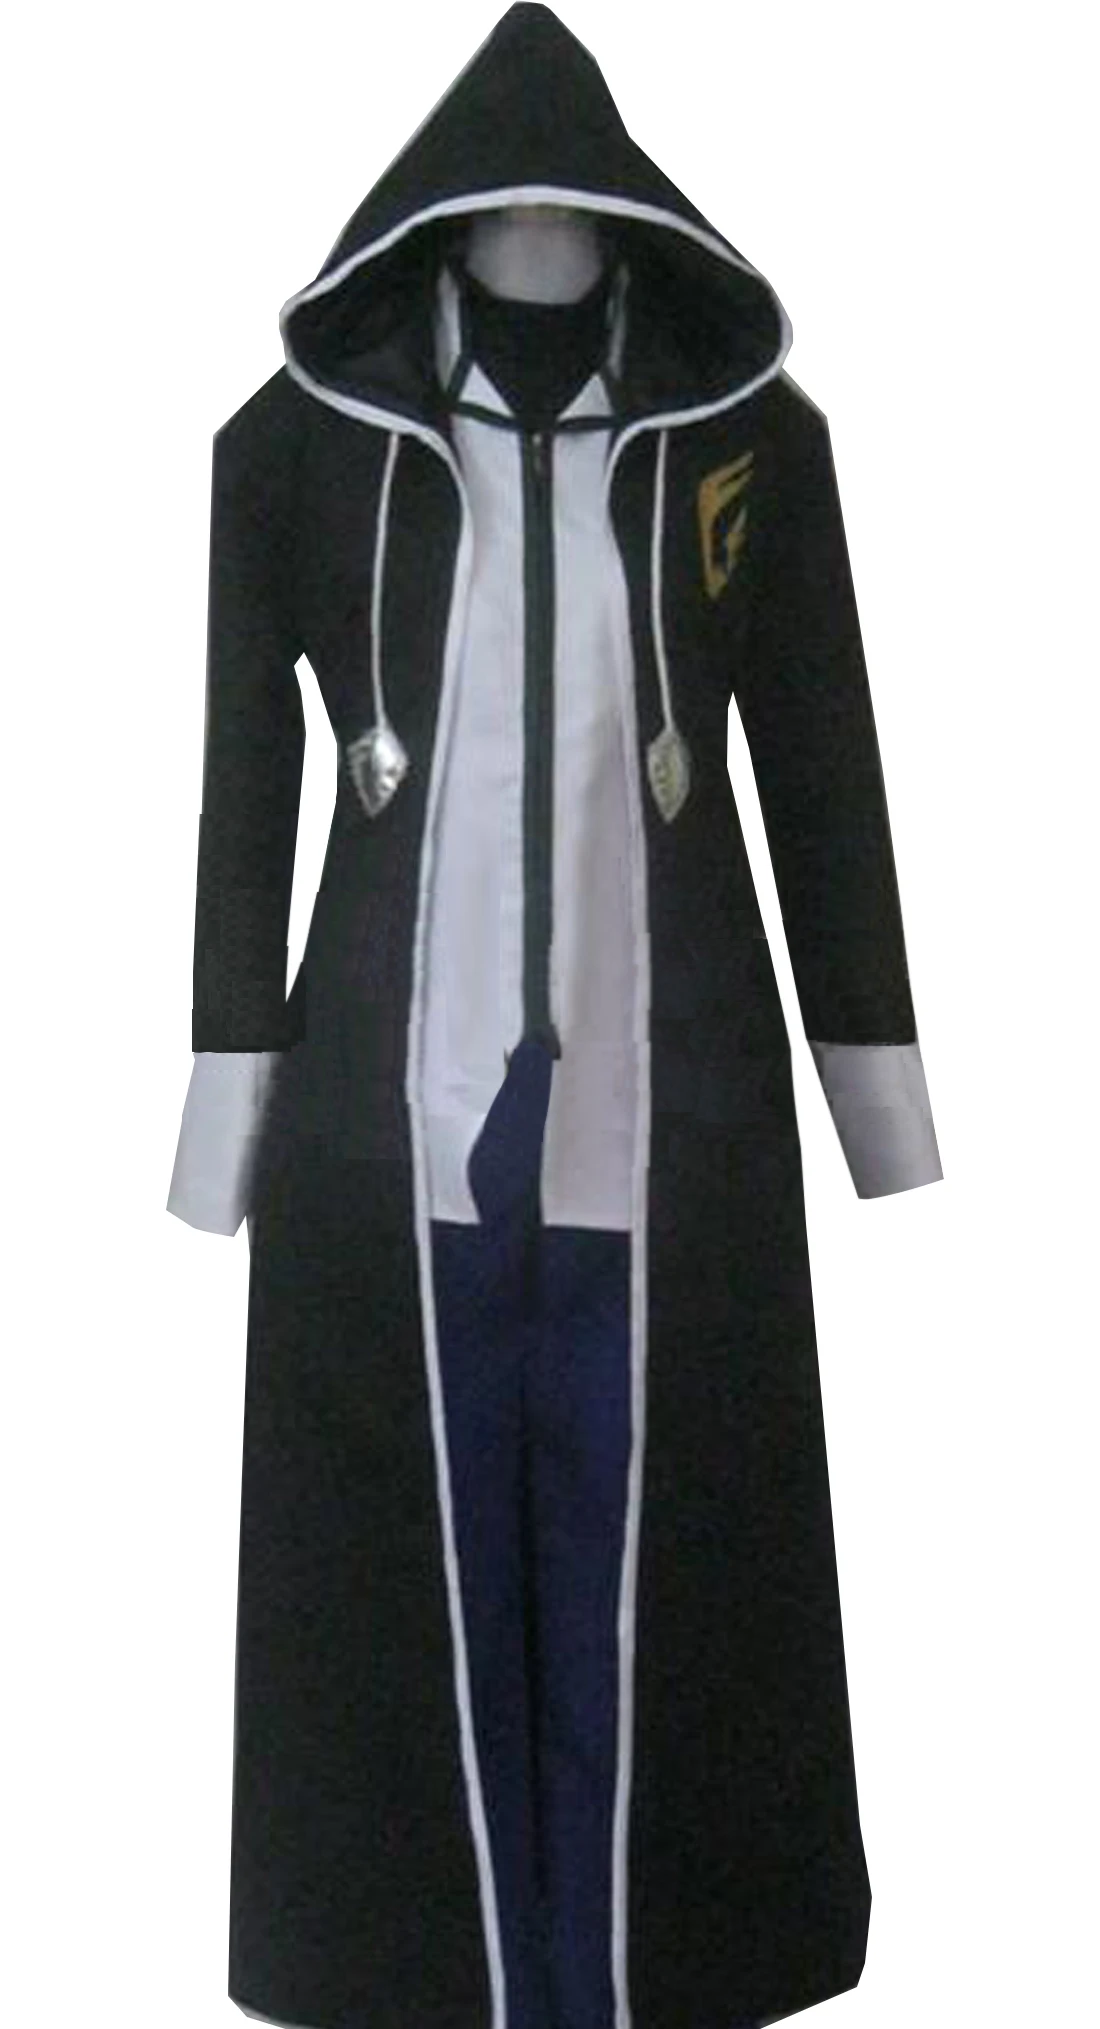 

Anime Fairy Tail Jellal Fernandes Cosplay Costume Halloween Party Costume Cloak Rope Cape Jacket Suit Mens Womens Uniform Custom